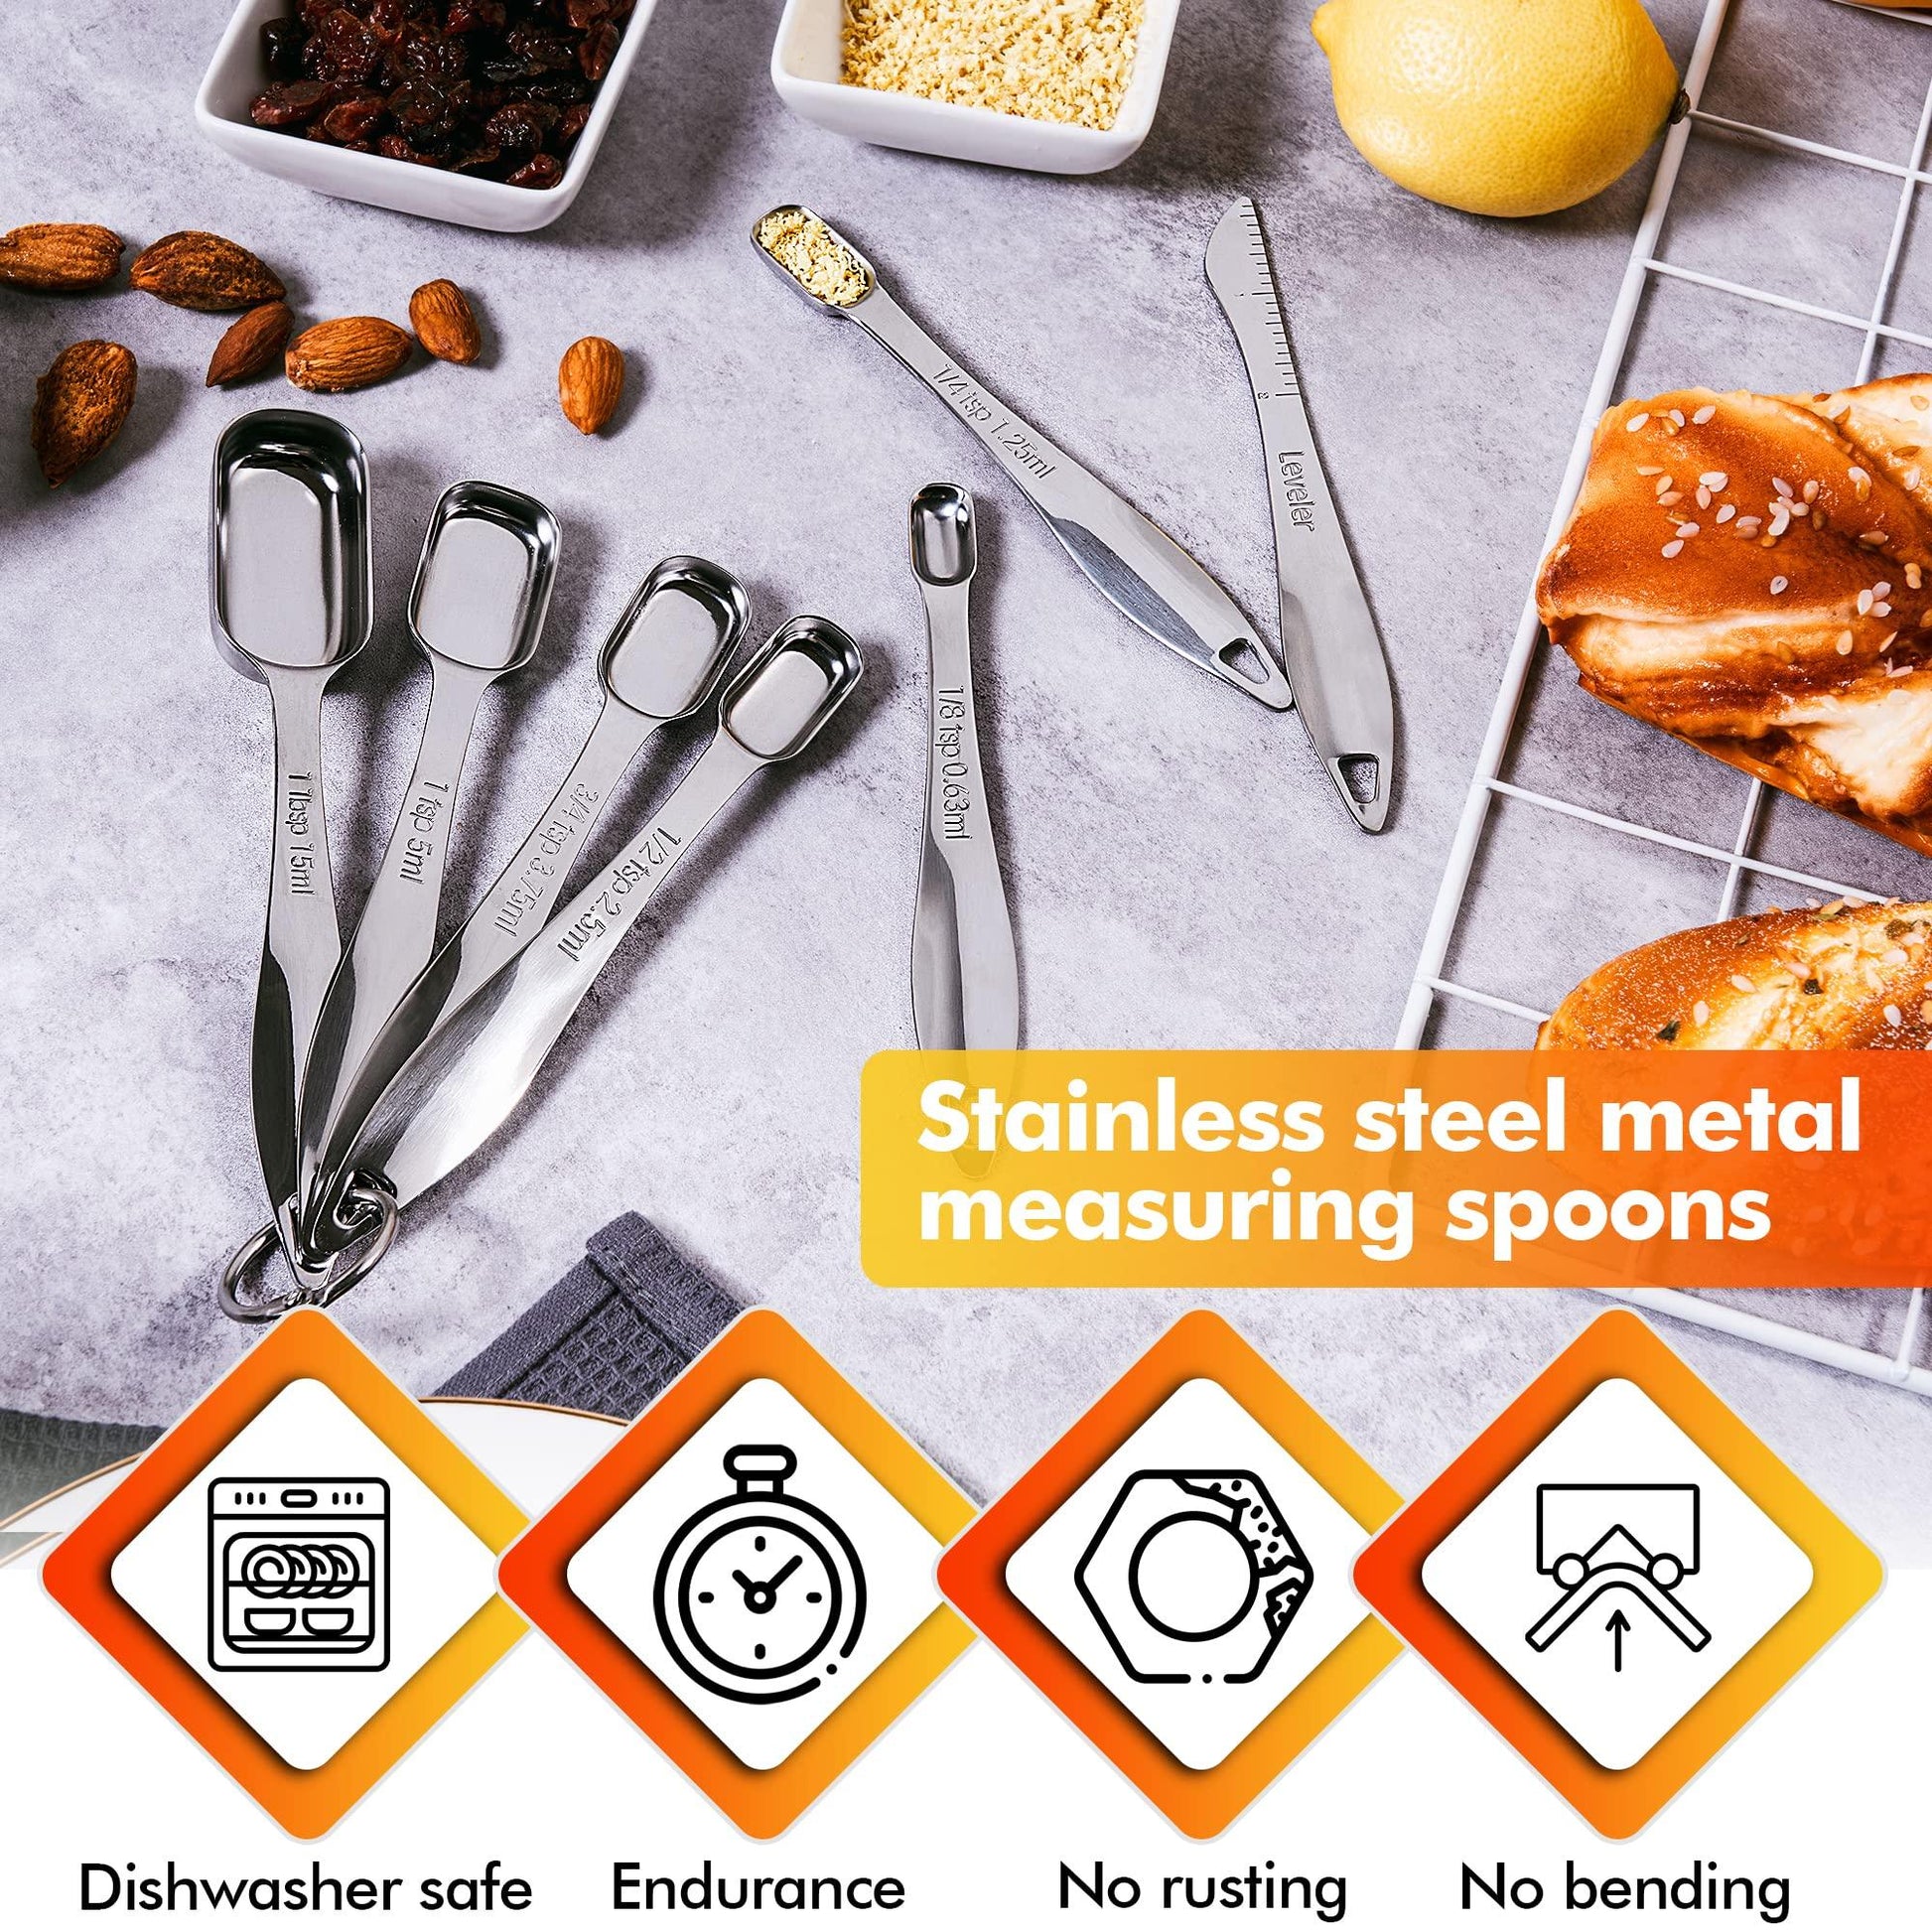 Rainspire Heavy Duty Measuring Spoons Set Stainless Steel, Metal Measuring Cups and Spoons Set for Dry or Liquid, Fits in Spice Jar, Home Gadgets Kitchen Gadgets, Set of 7 Including Leveler - CookCave